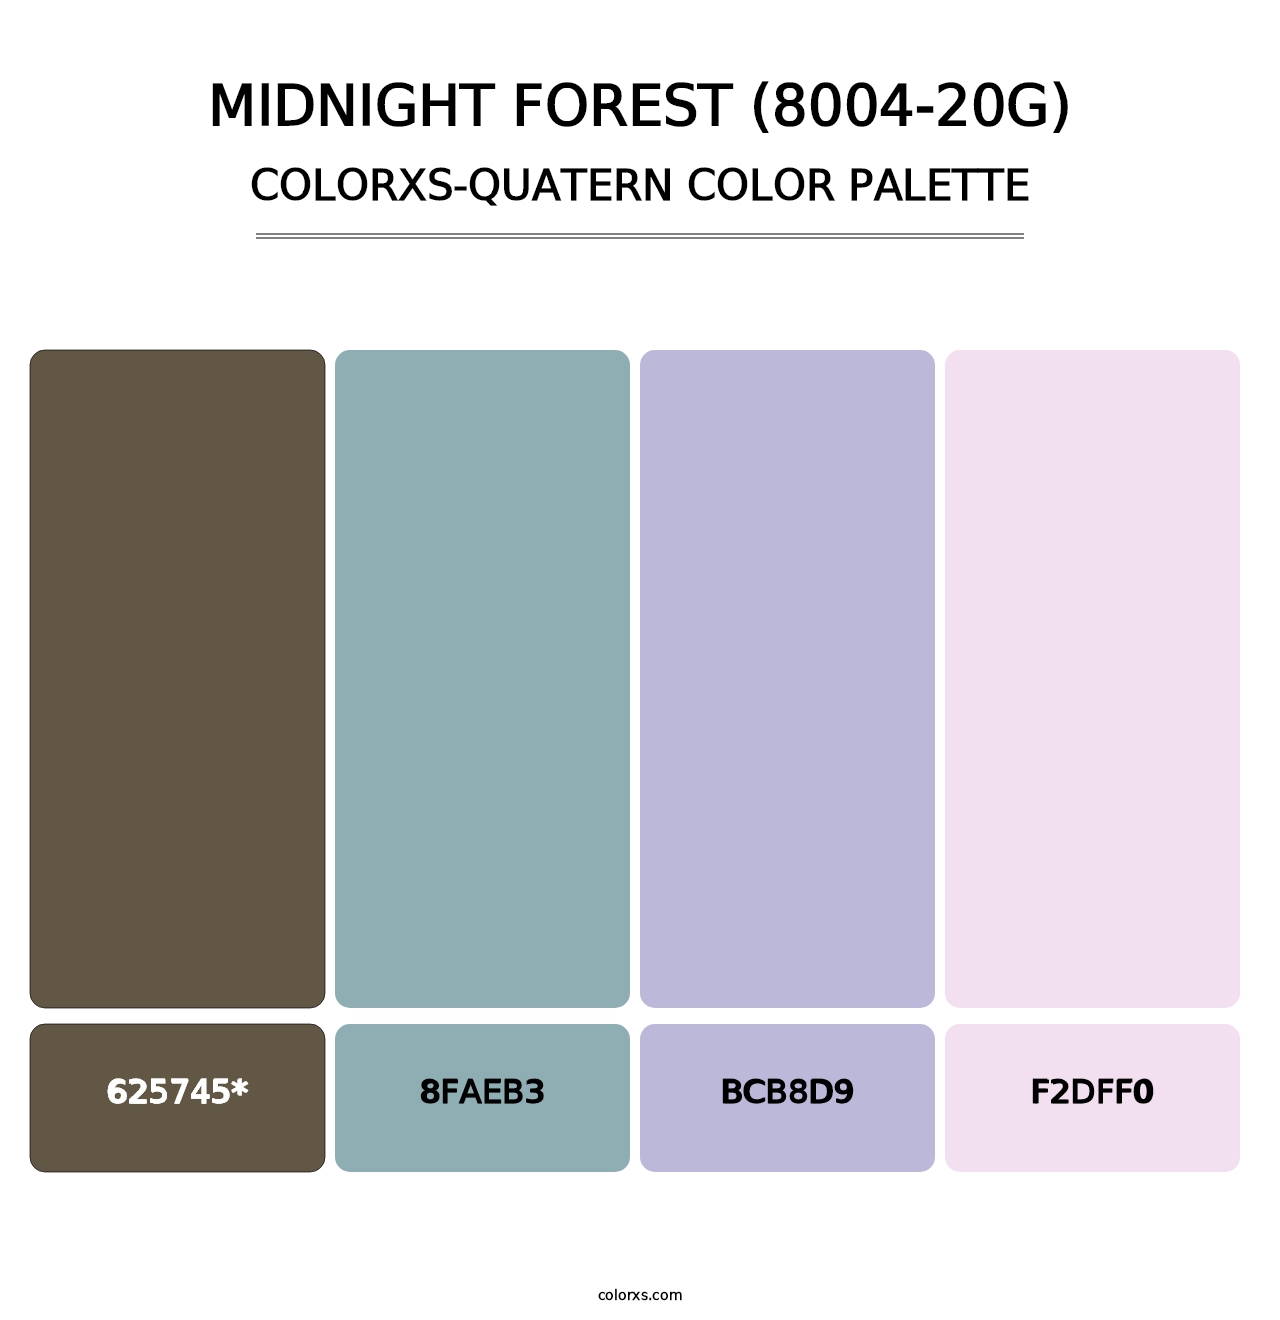 Midnight Forest (8004-20G) - Colorxs Quatern Palette